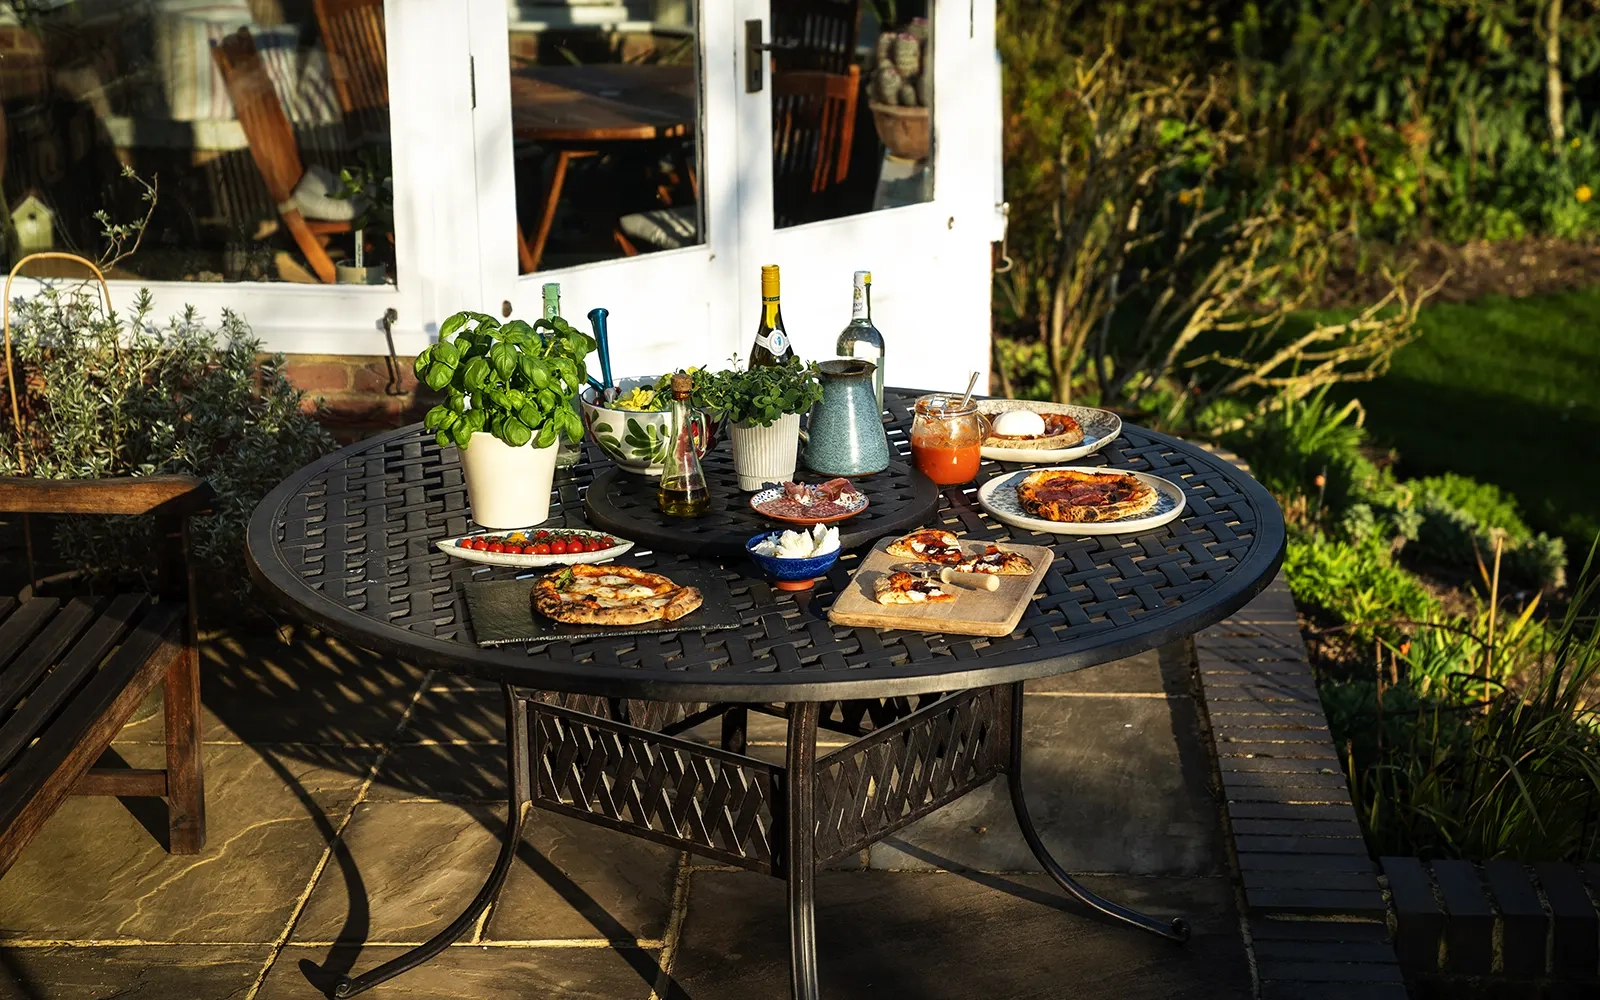 Outdoor table with various pizzas, sauces and pot plants